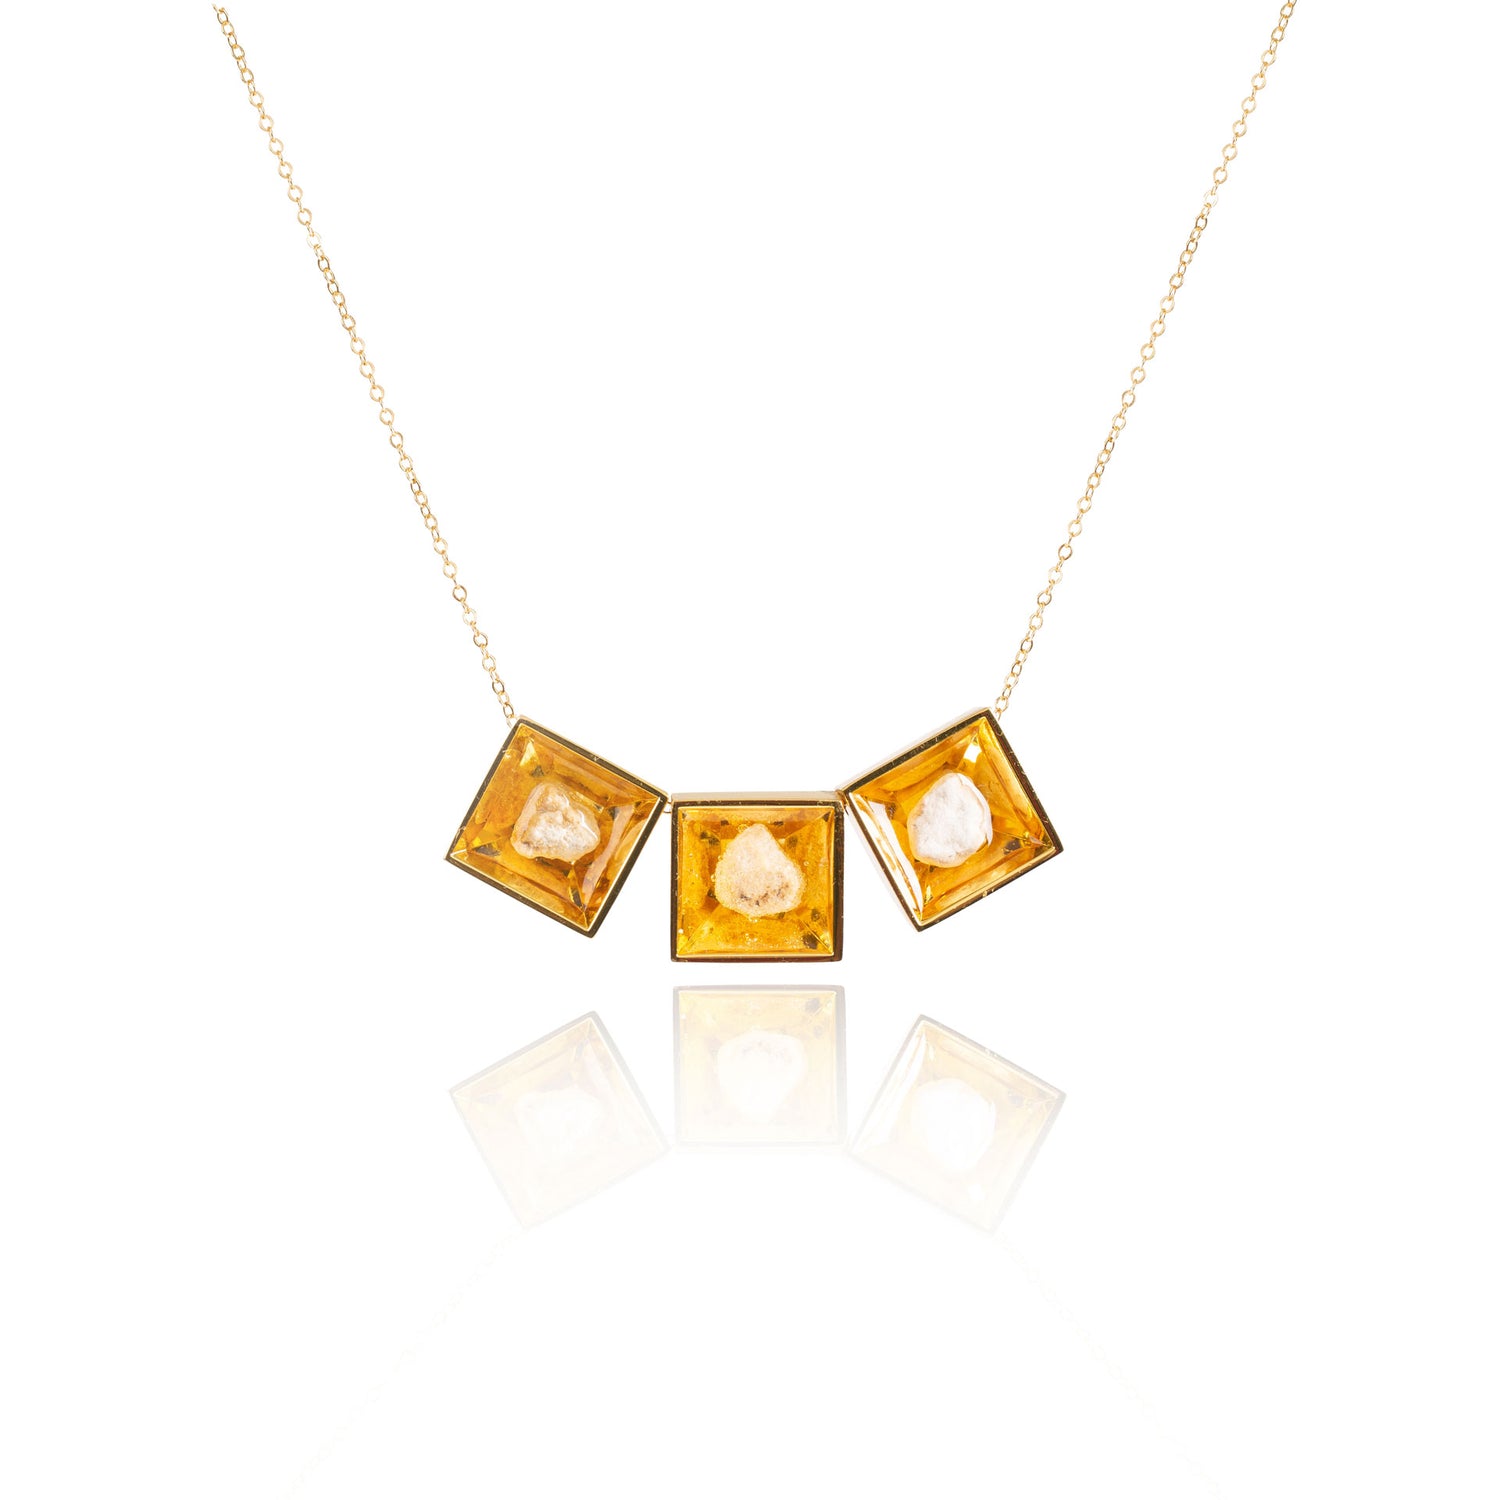 Three small natural tan stones sit in the middle of three separate square shaped metal pendants in a gold color. The pendants are hanging on a gold chain.